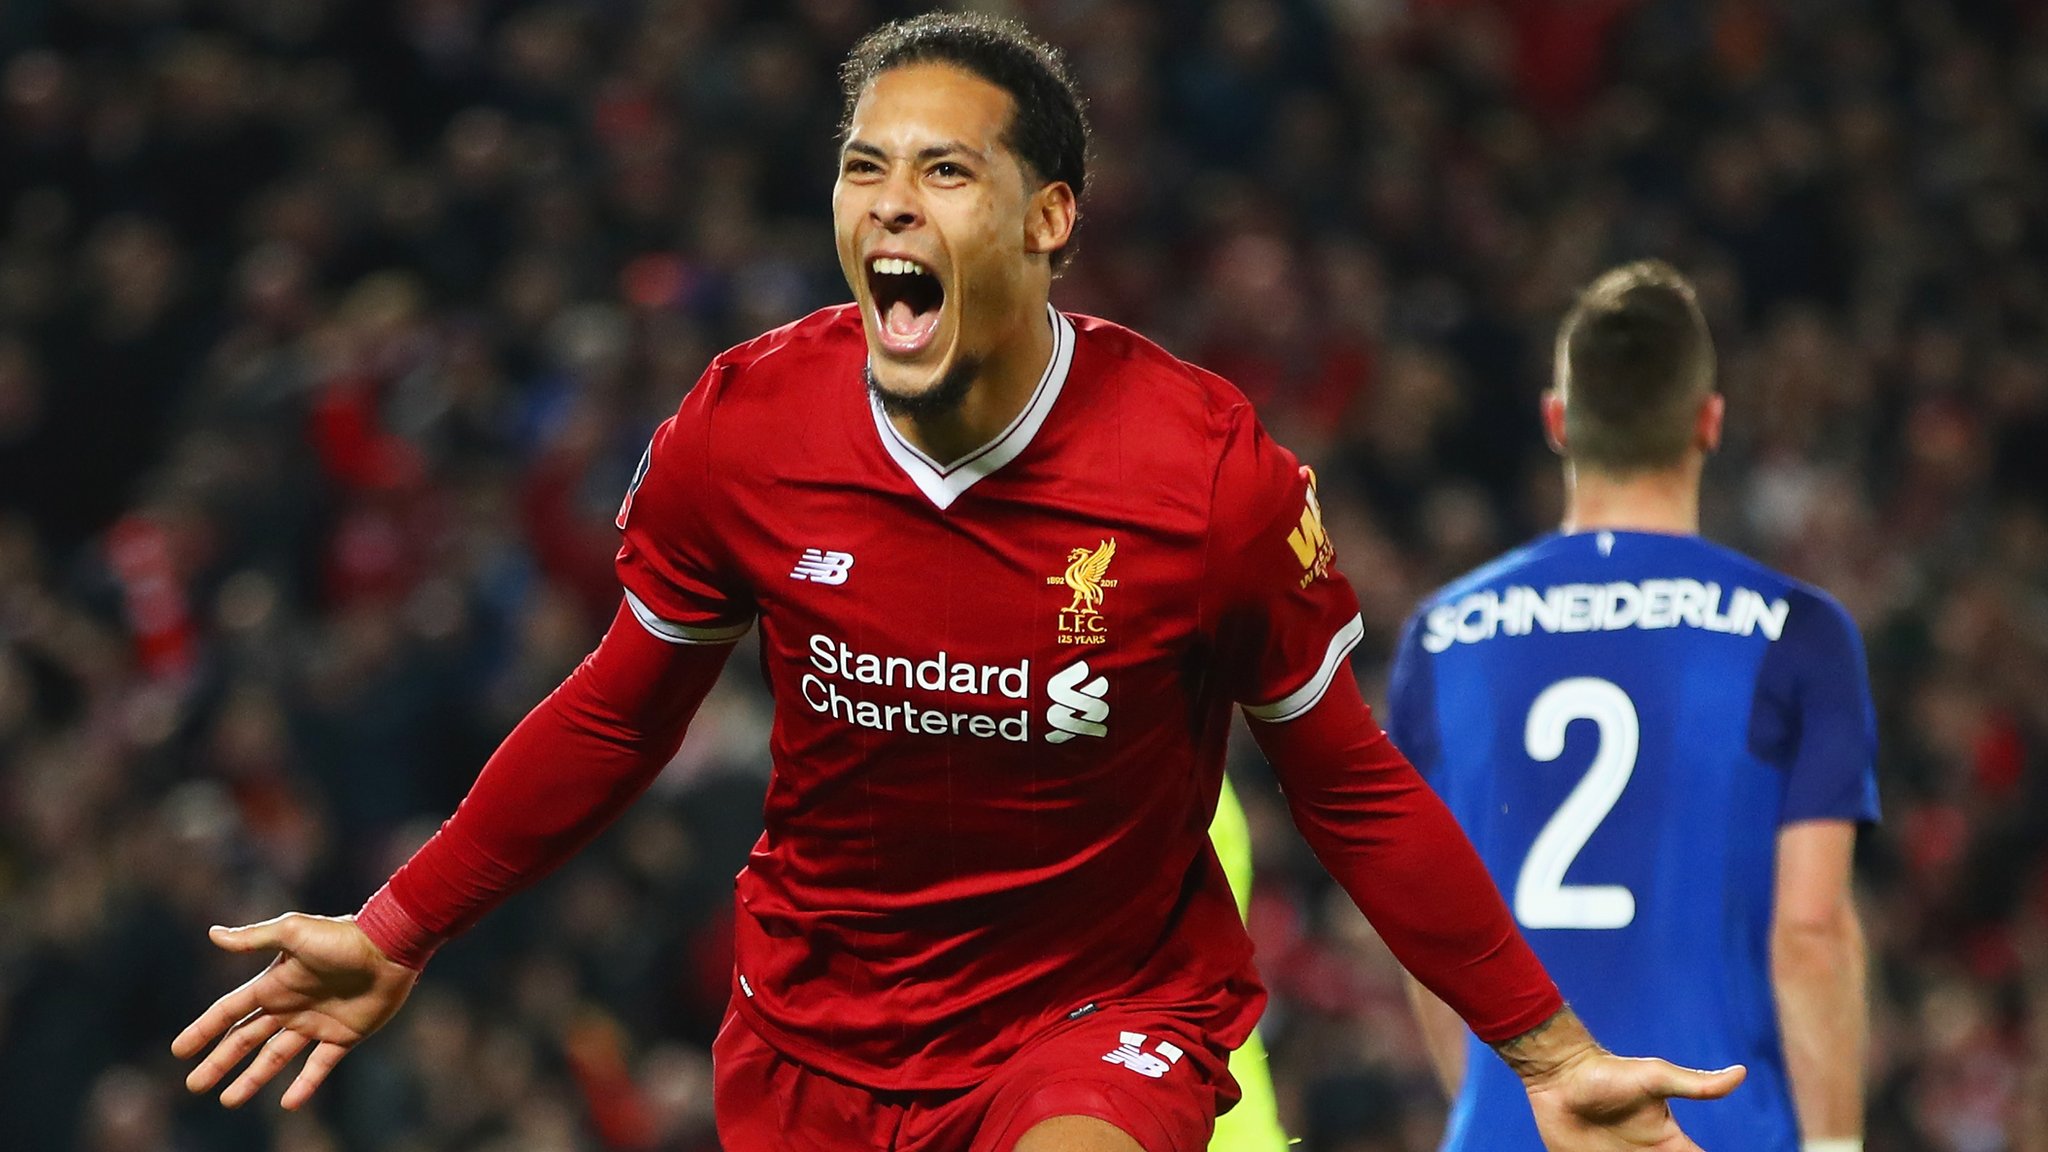 I had to step up my game when I joined Liverpool - Van Dijk